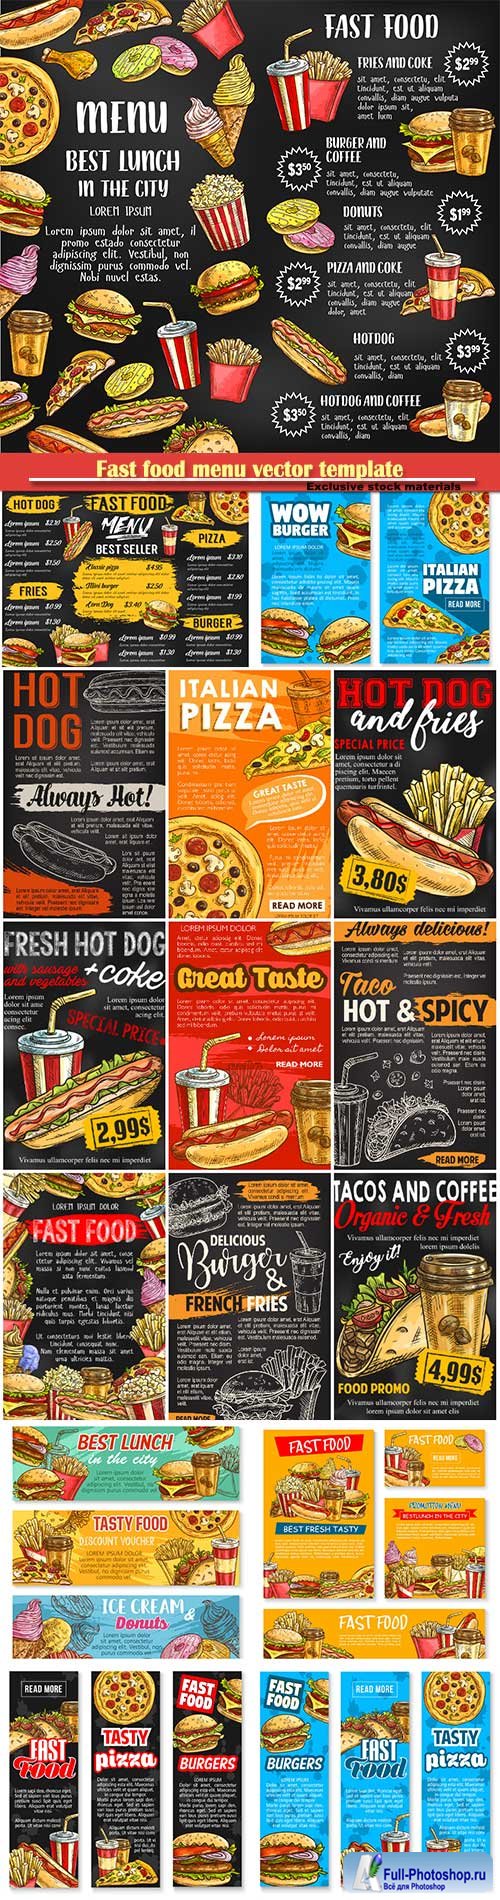 Fast food menu vector template, cheeseburger, burger, hotdog, sandwich, snack, french fries or pizza